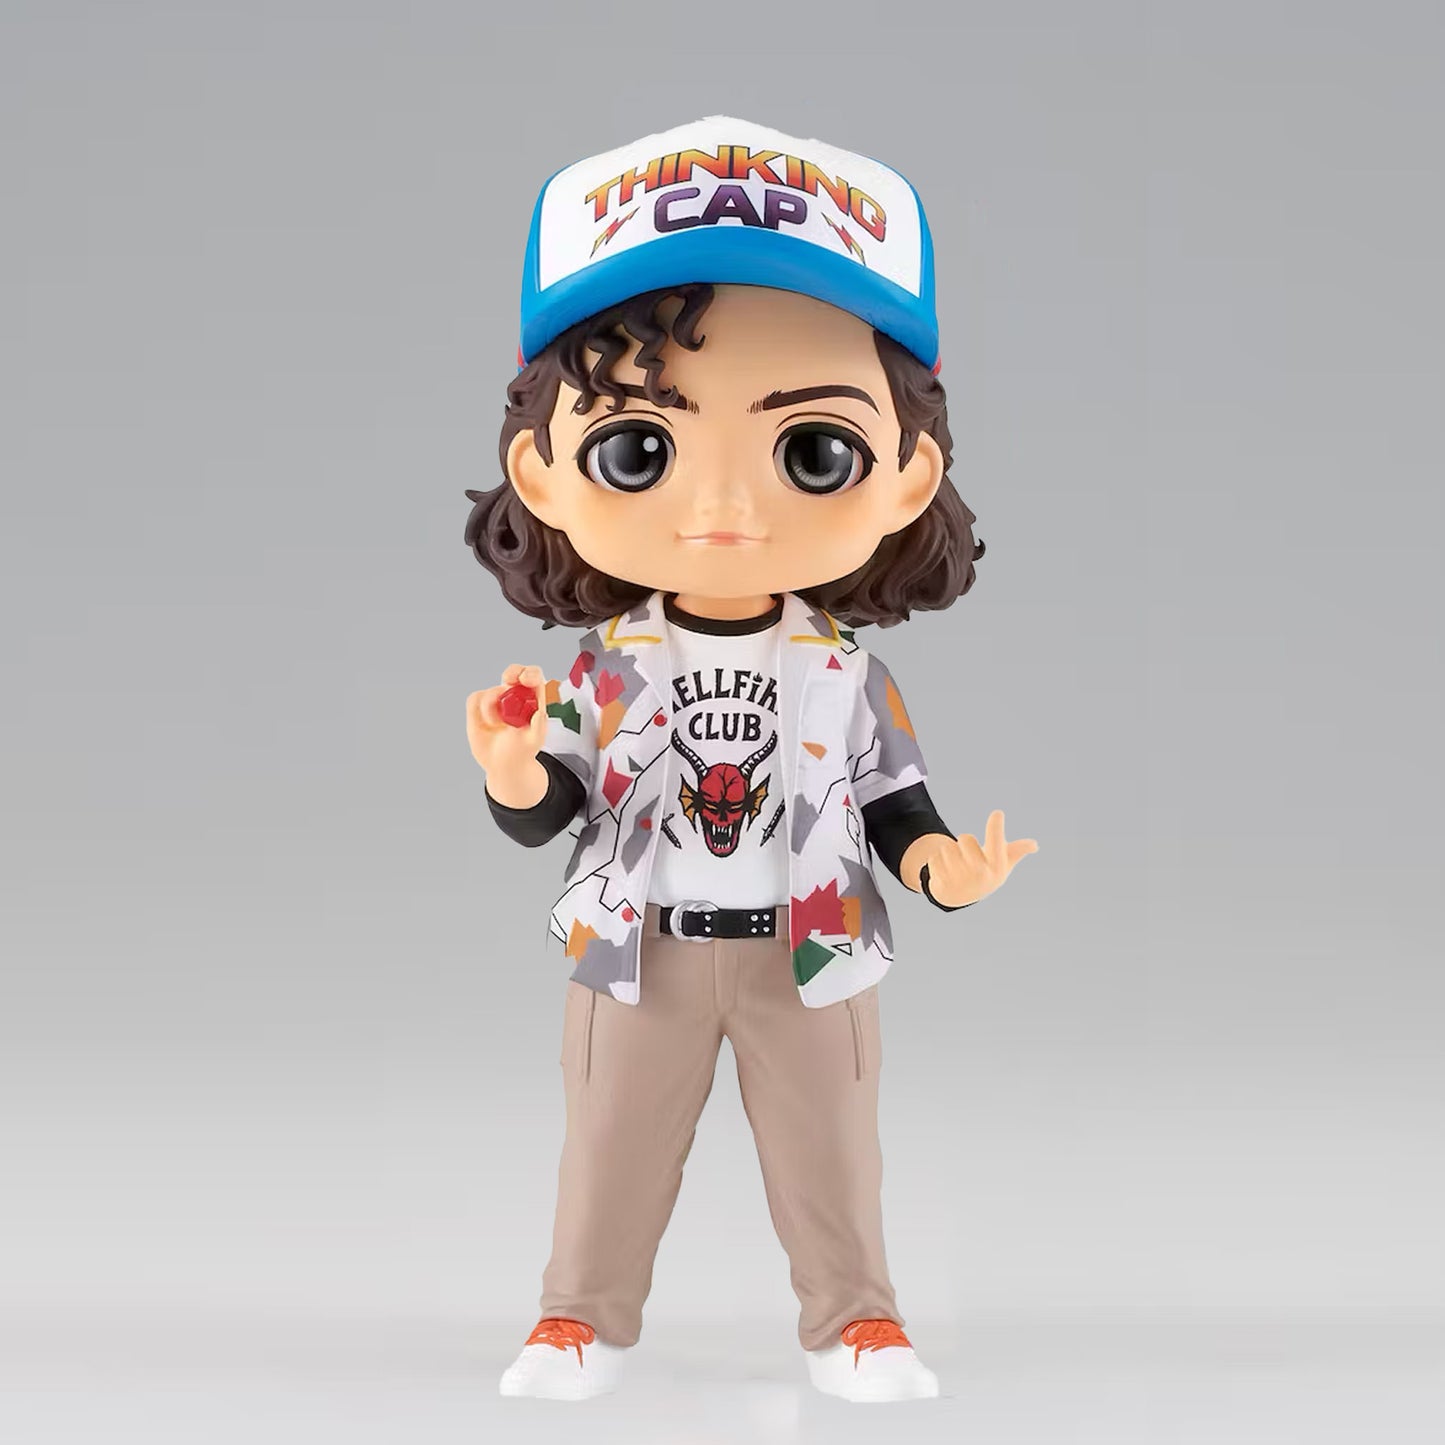 Load image into Gallery viewer, Dustin (Stranger Things) Season 4 Q-Posket Vol. 2 Statue
